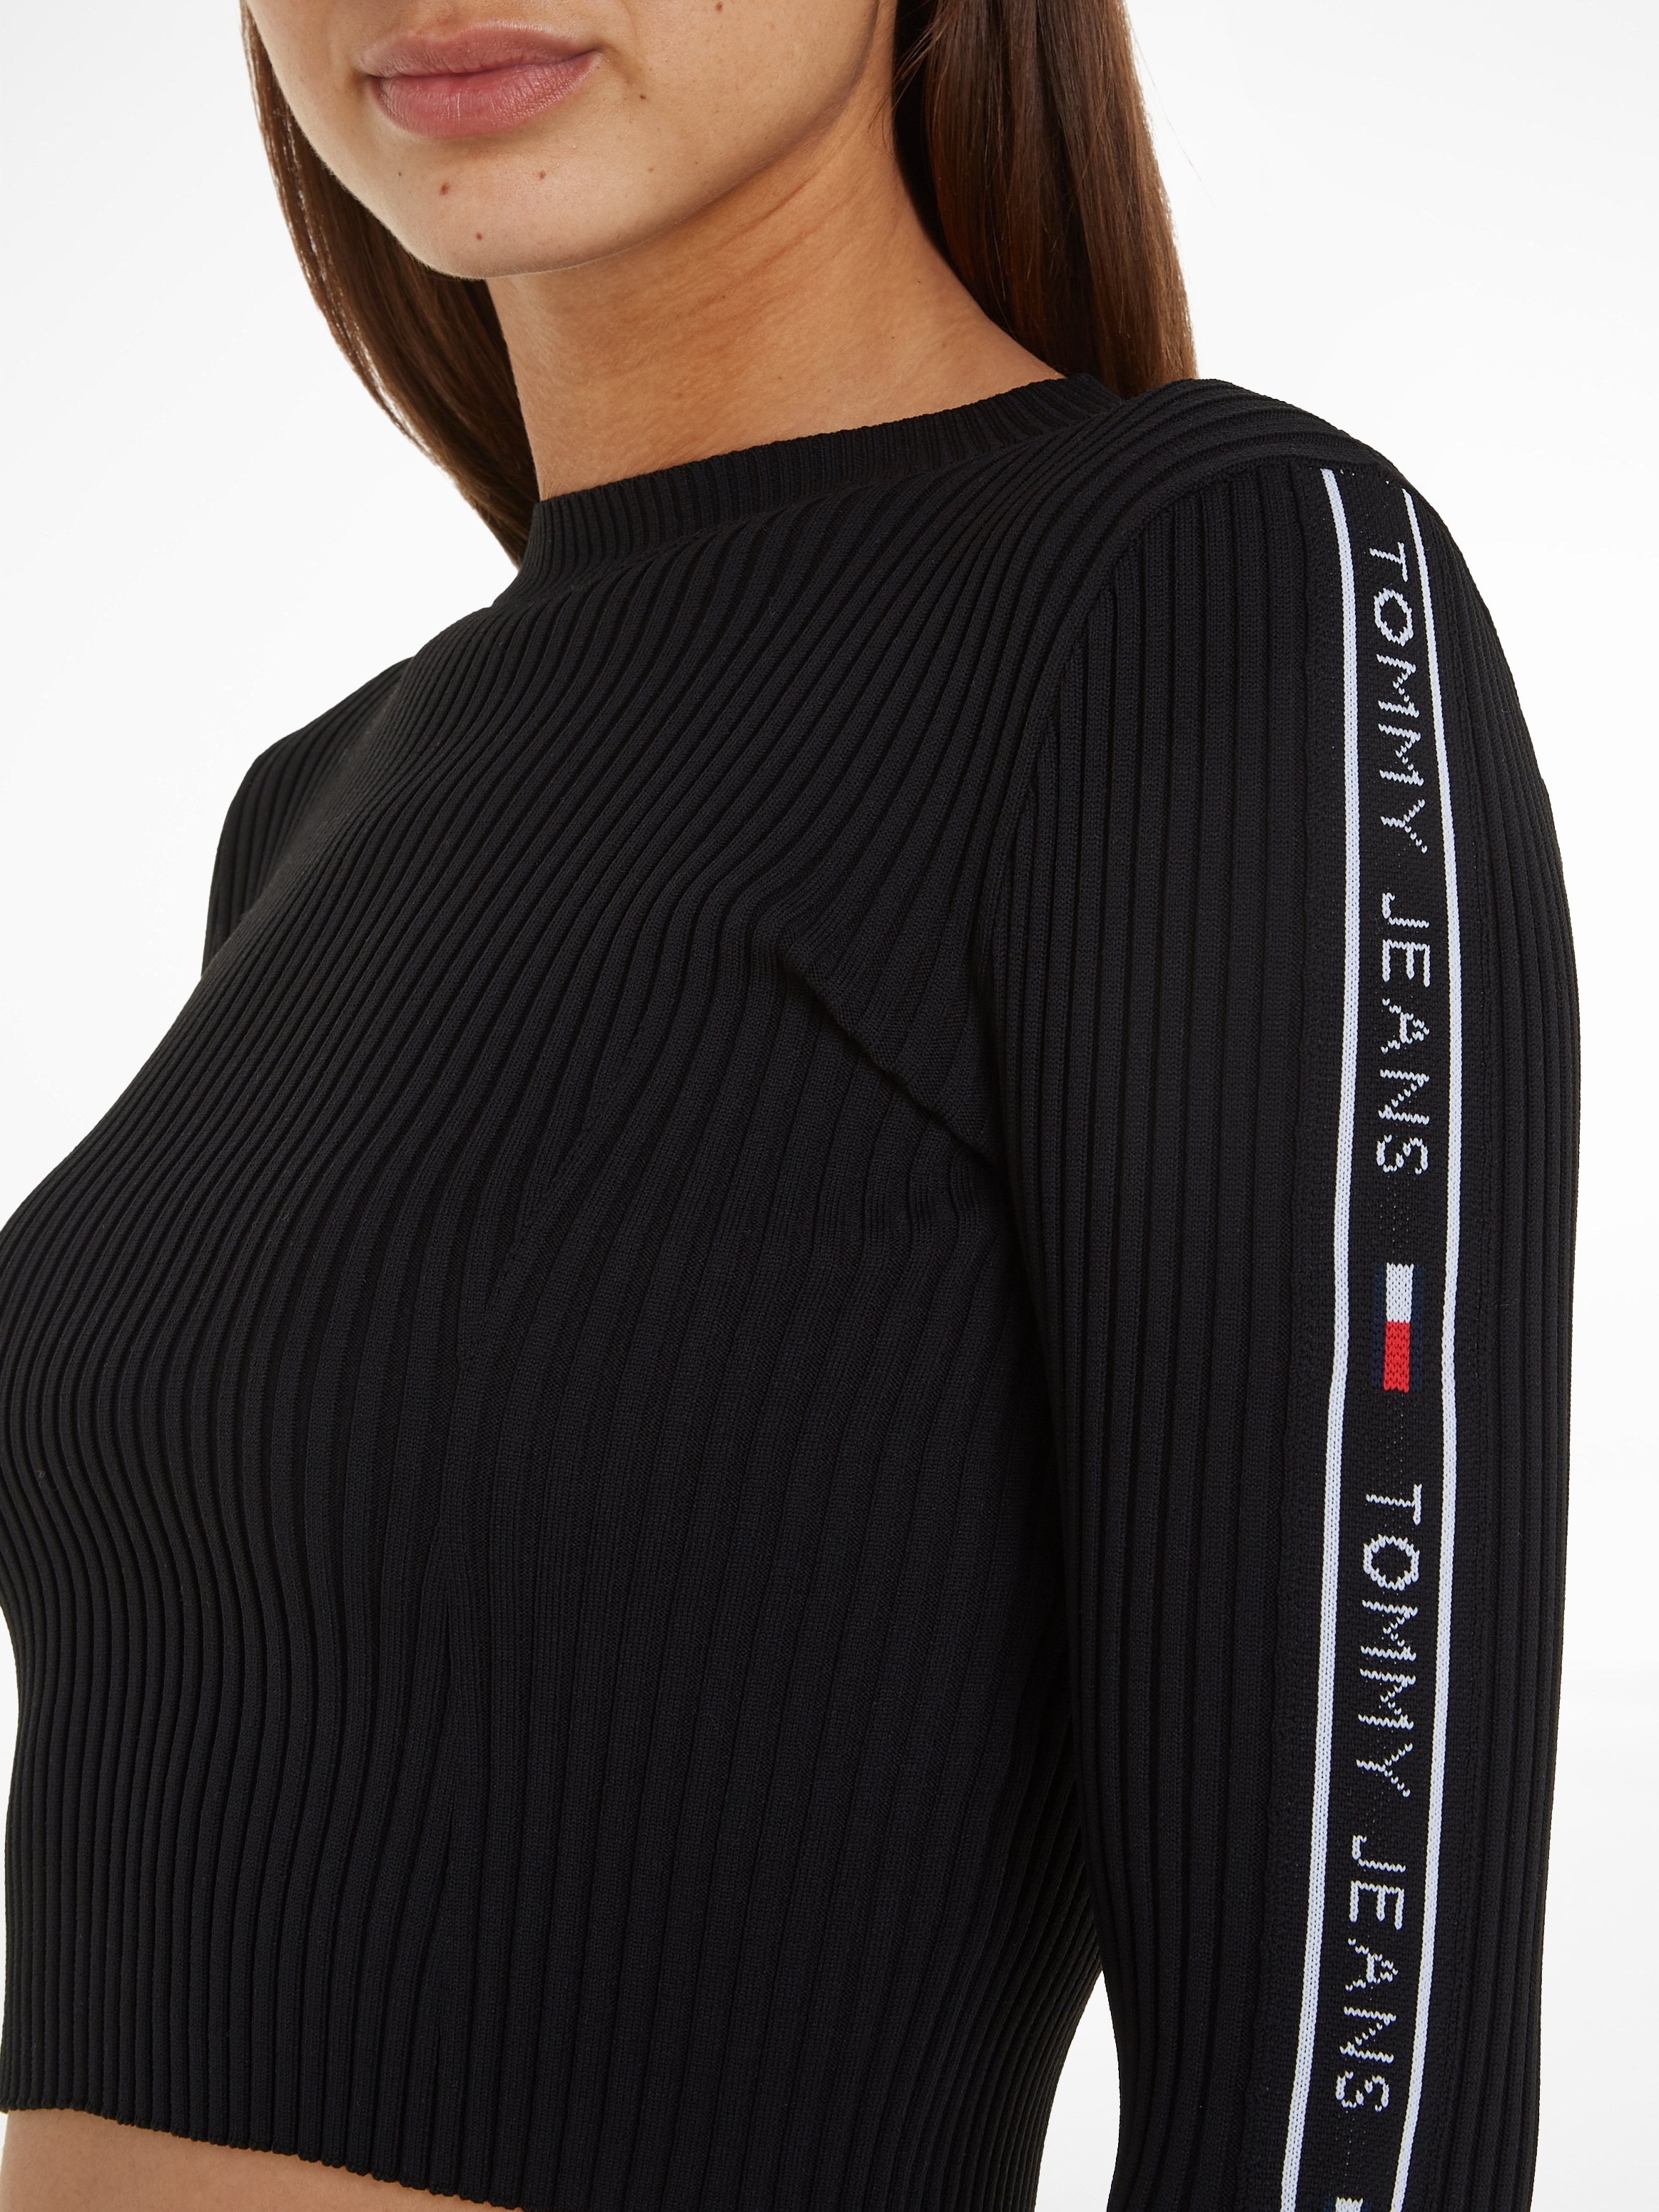 Tommy Jeans Strickpullover »TJW LOGO TAPING SWEATER«, mit Taping